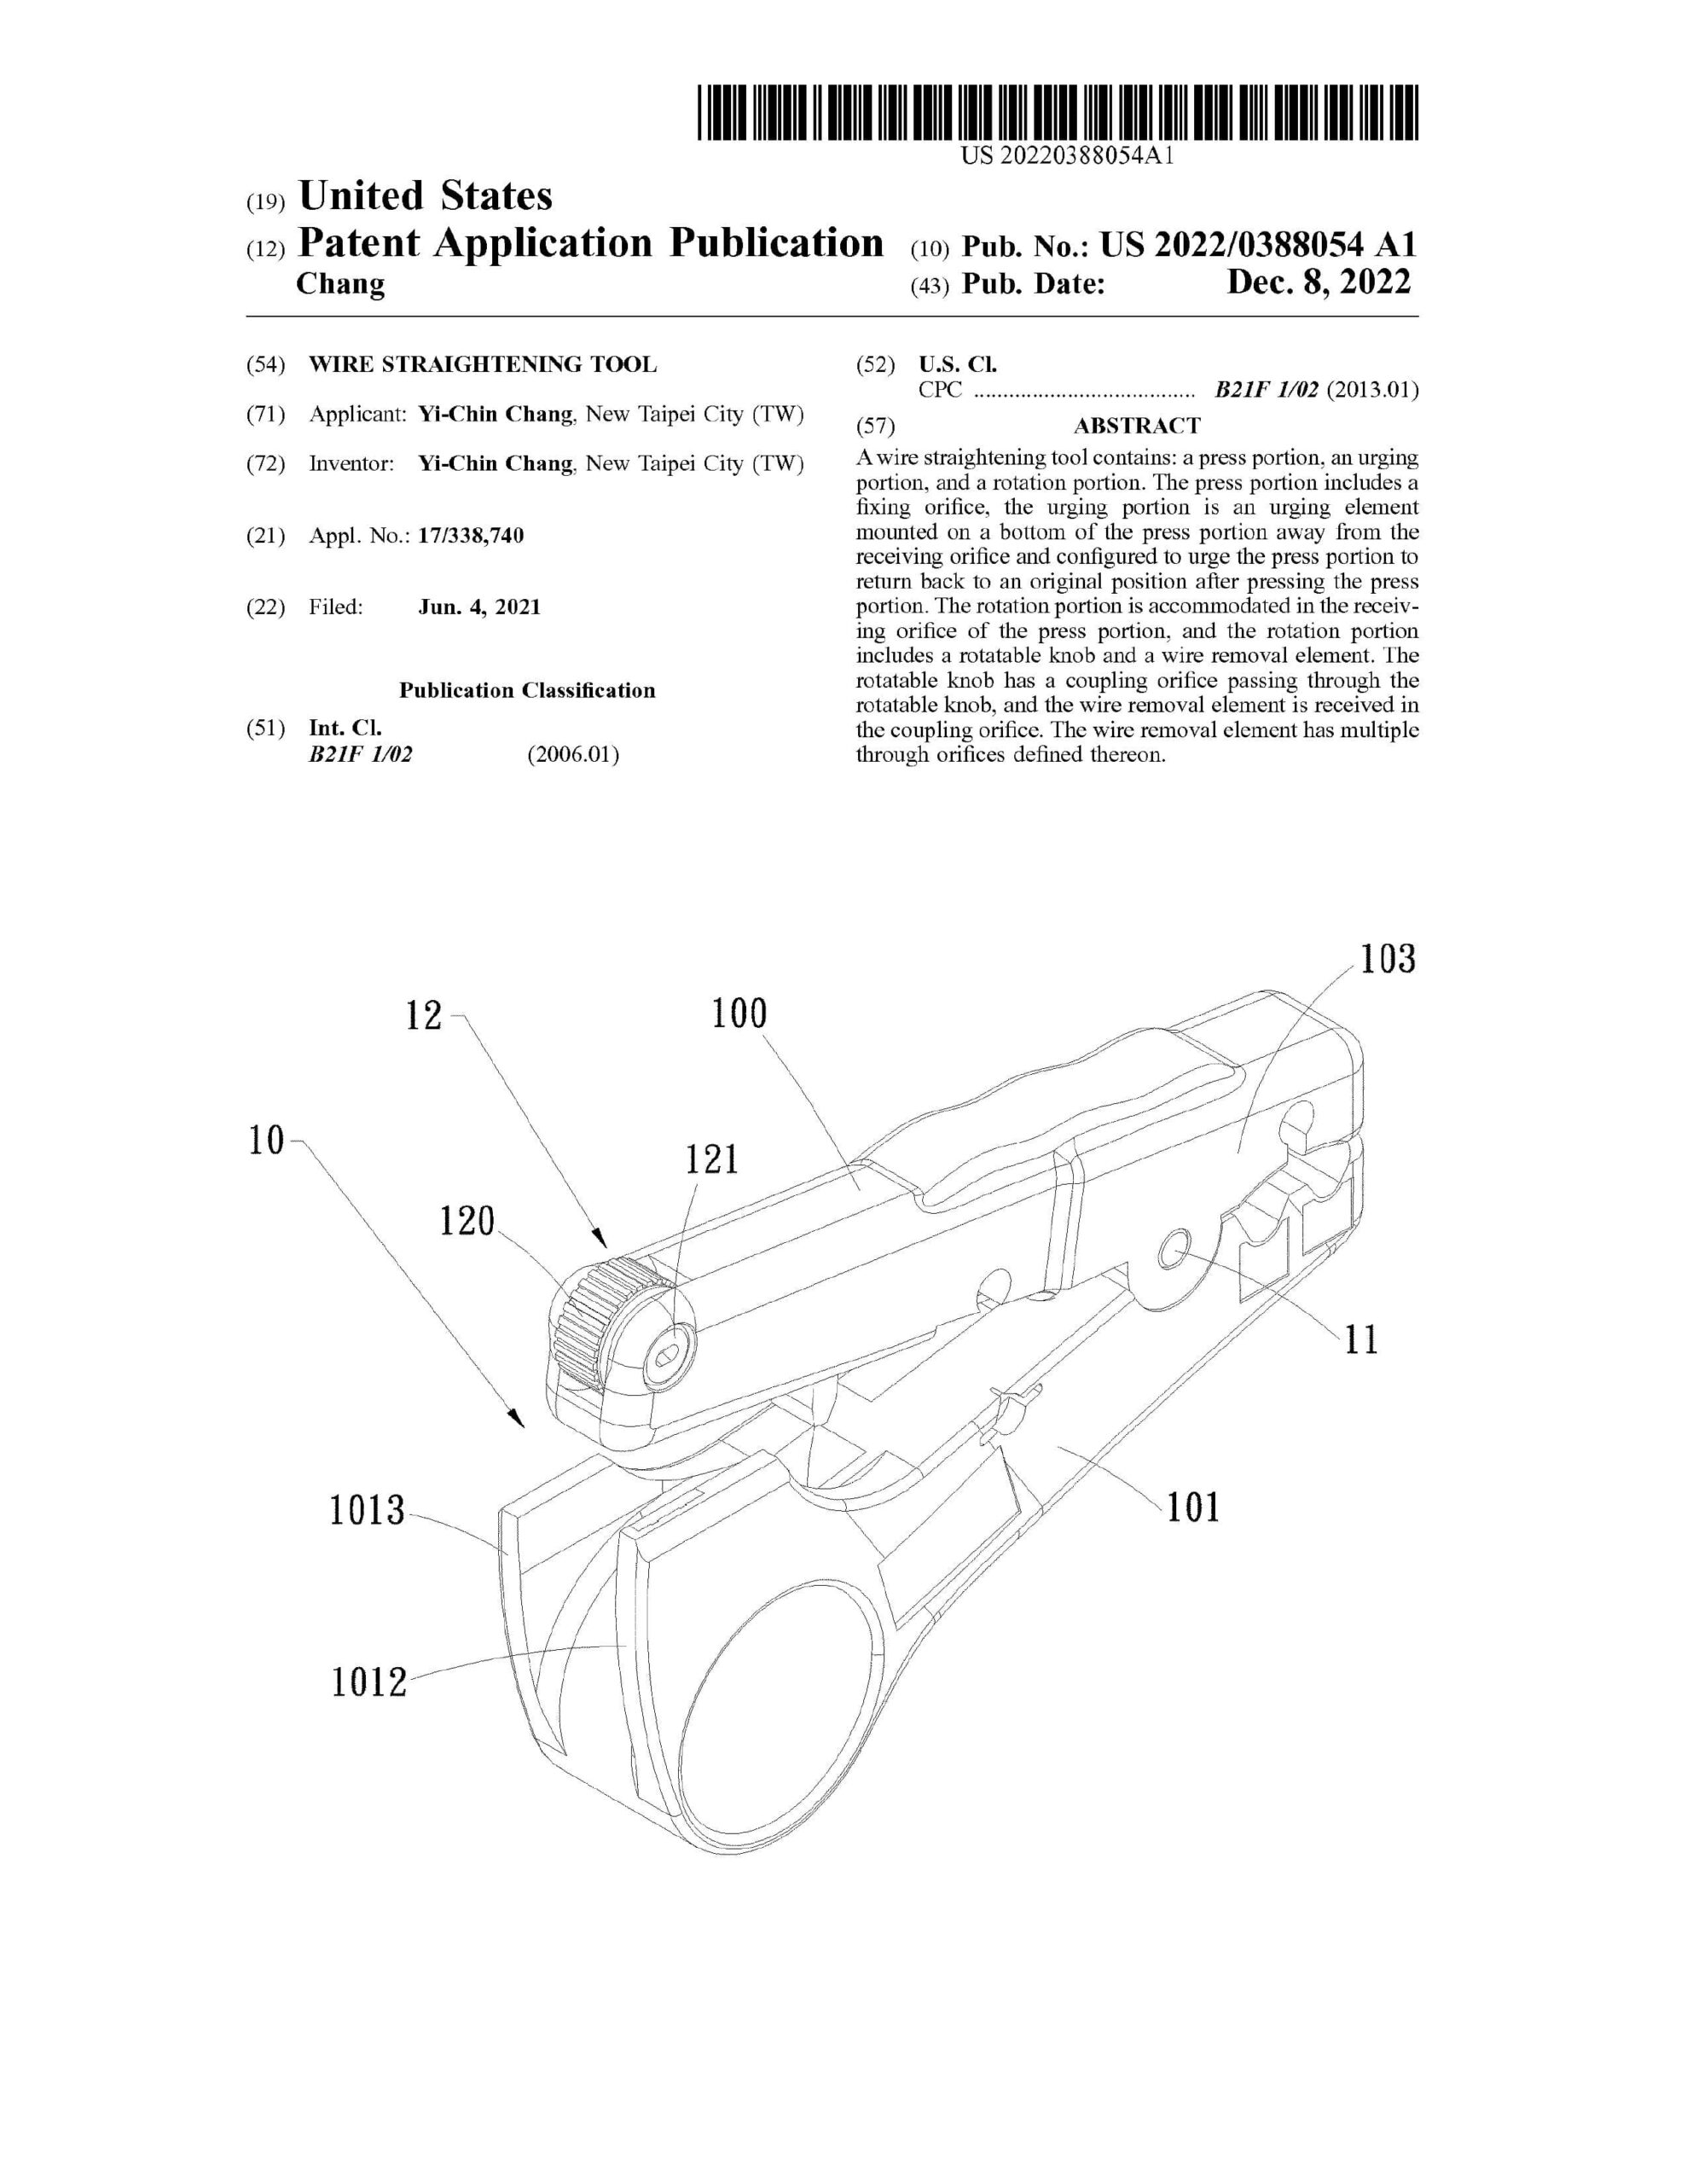 Patented In the U.S.(US 20220388054 A1)